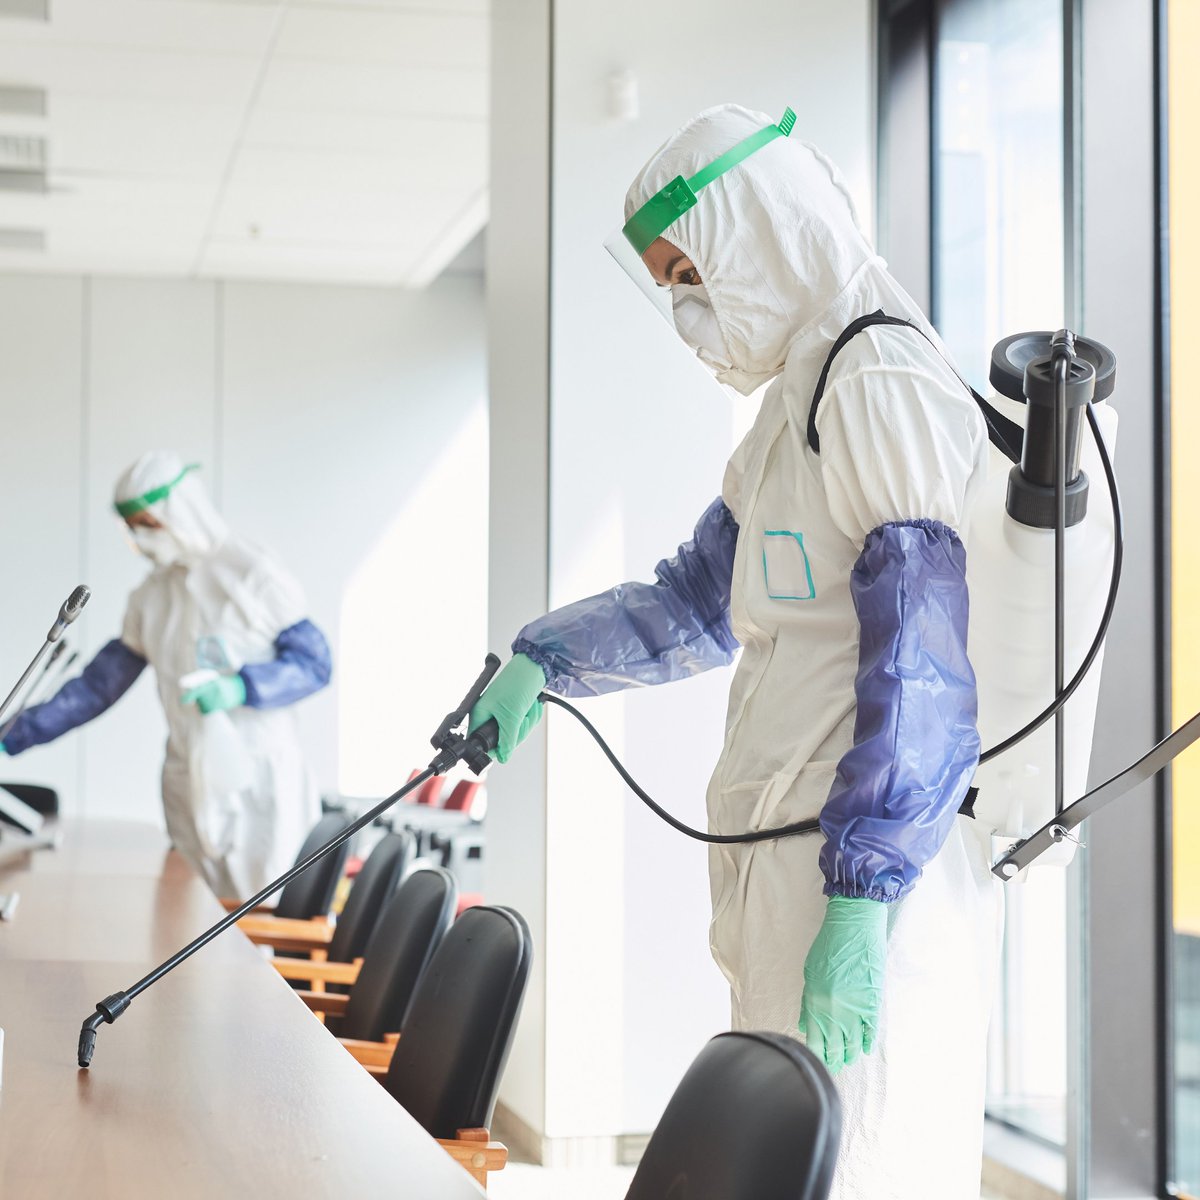 Enhance Hygiene with Surface Disinfection Systems! 

Discover the various methods employed to effectively eliminate harmful pathogens like bacteria, viruses, and fungi on different surfaces.

Blog available at bit.ly/3Y2k8UH

#medzell #SurfaceDisinfection